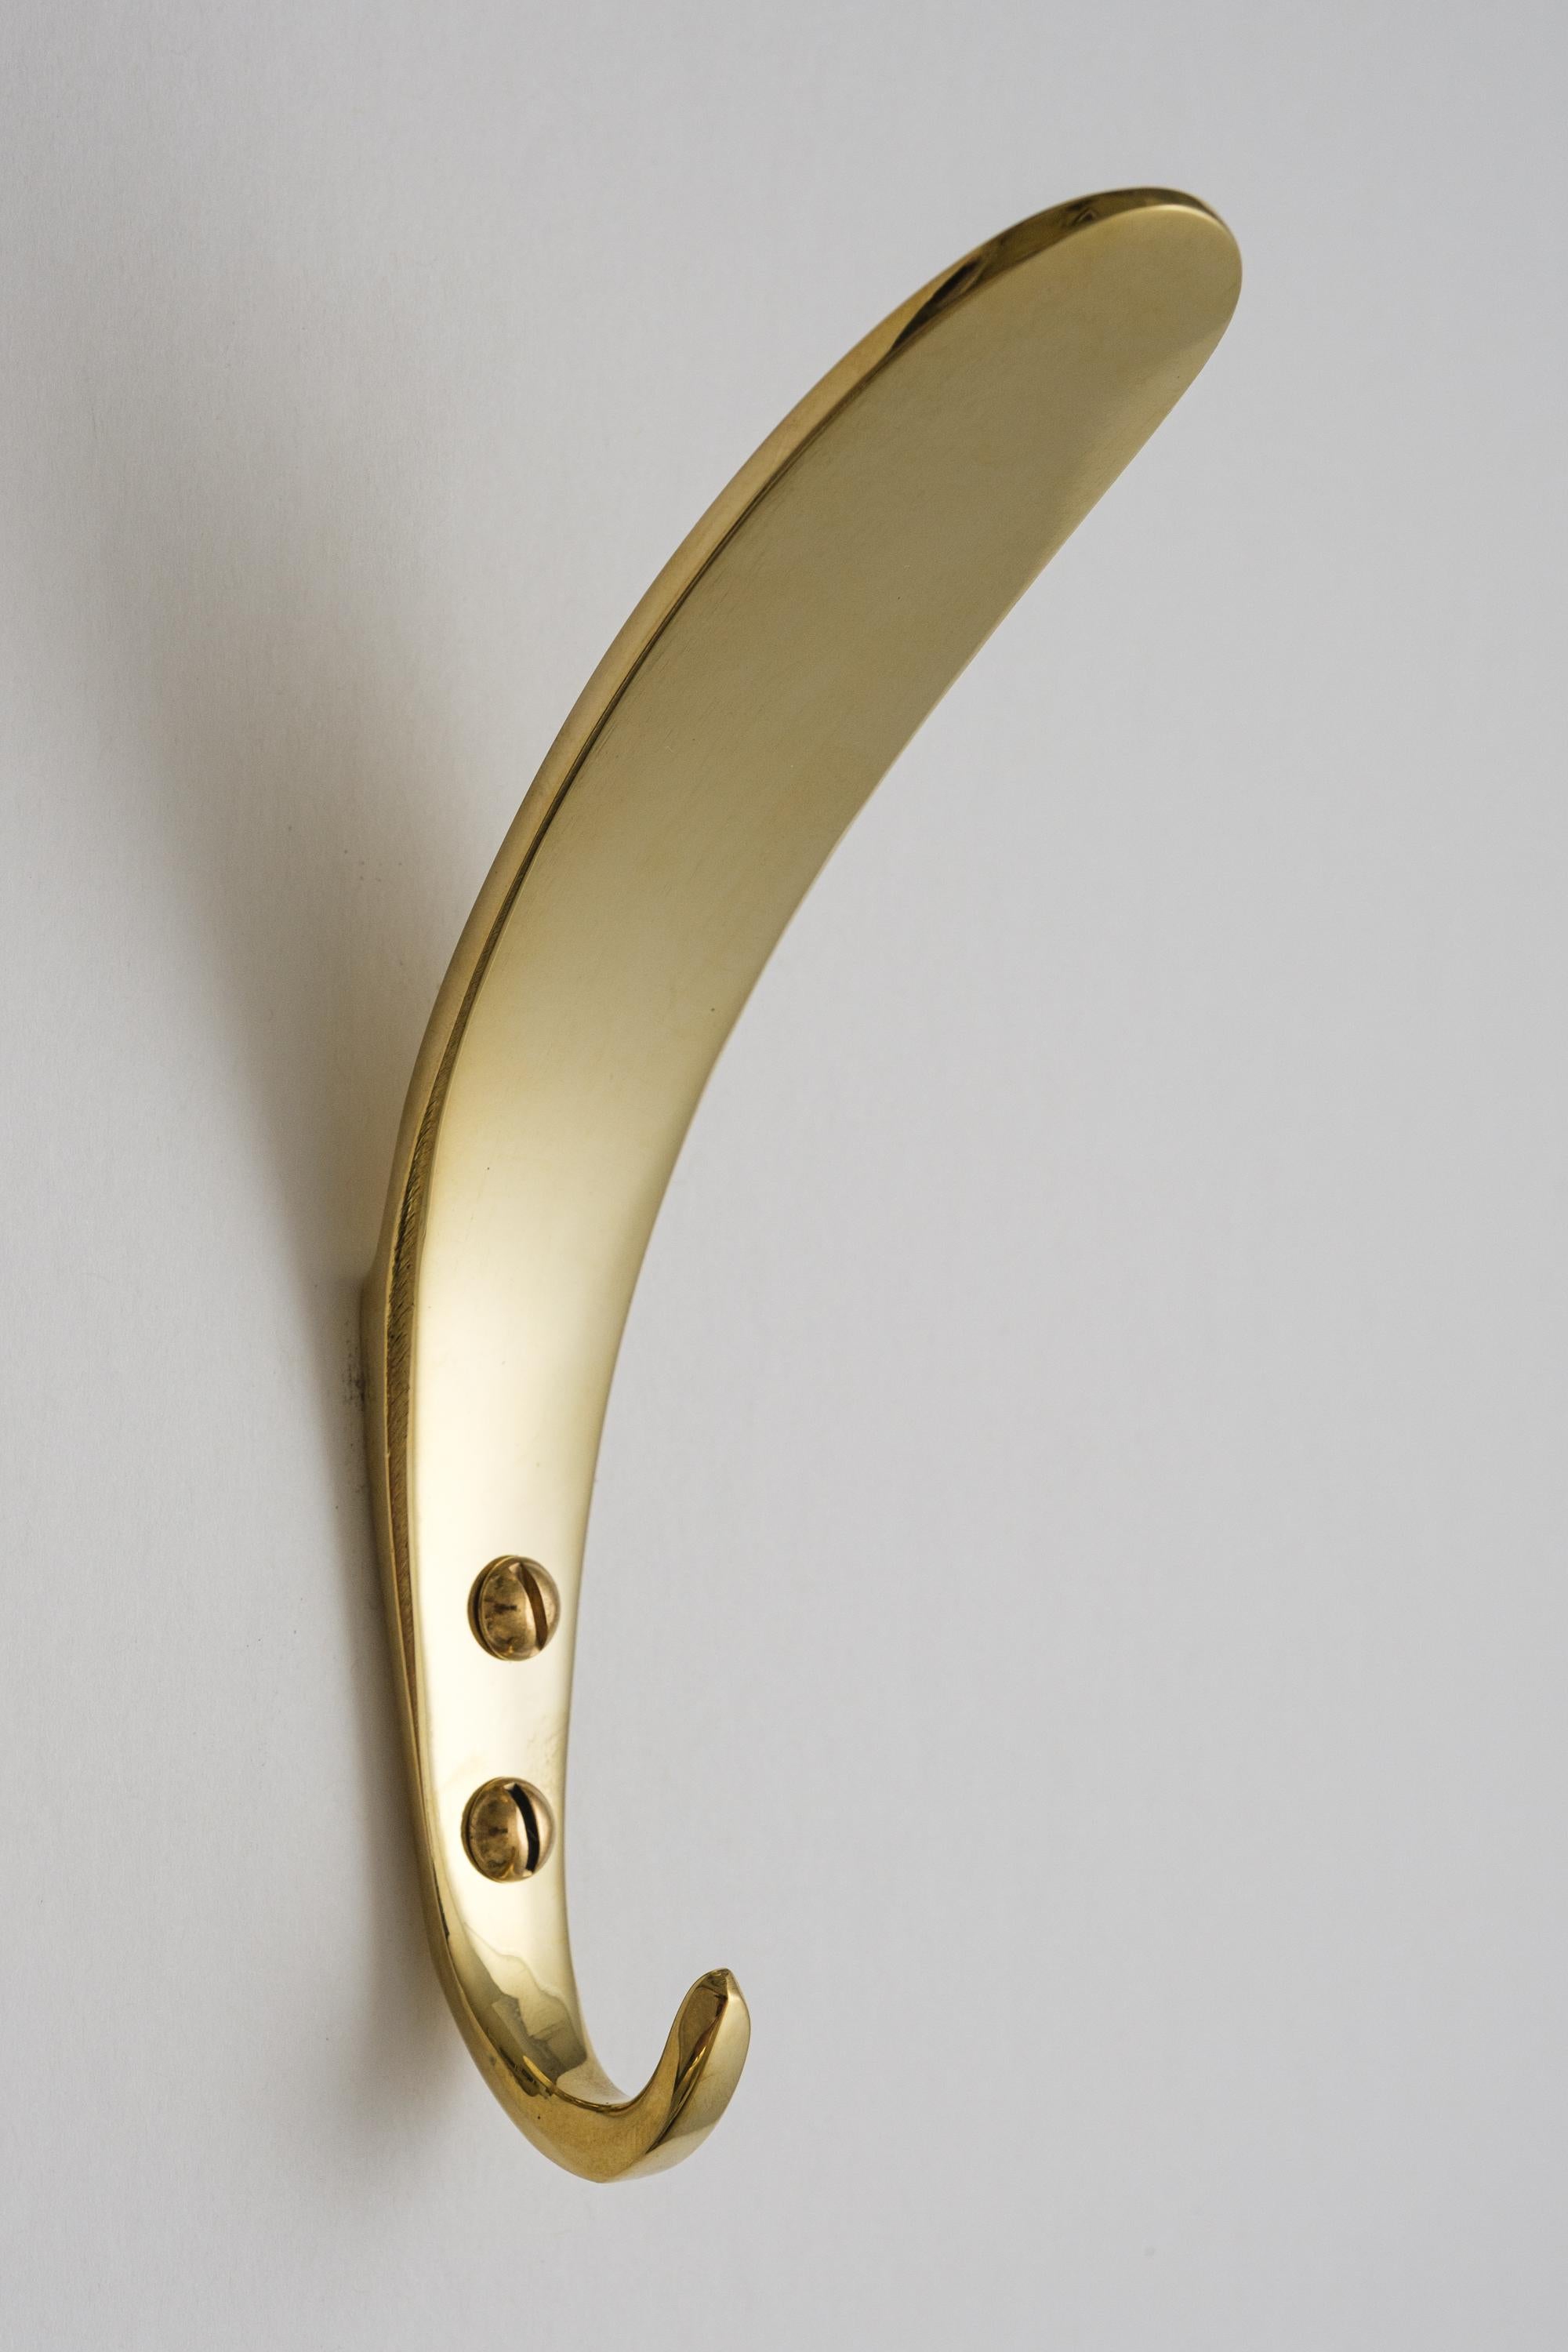 Carl Auböck Model #4327 polished brass hook. Designed in the 1950s, this versatile and minimalist Viennese hook is executed in polished brass by Werkstätte Carl Auböck, Austria.

Produced by Carl Auböck IV in the original Auböck workshop in the 7th